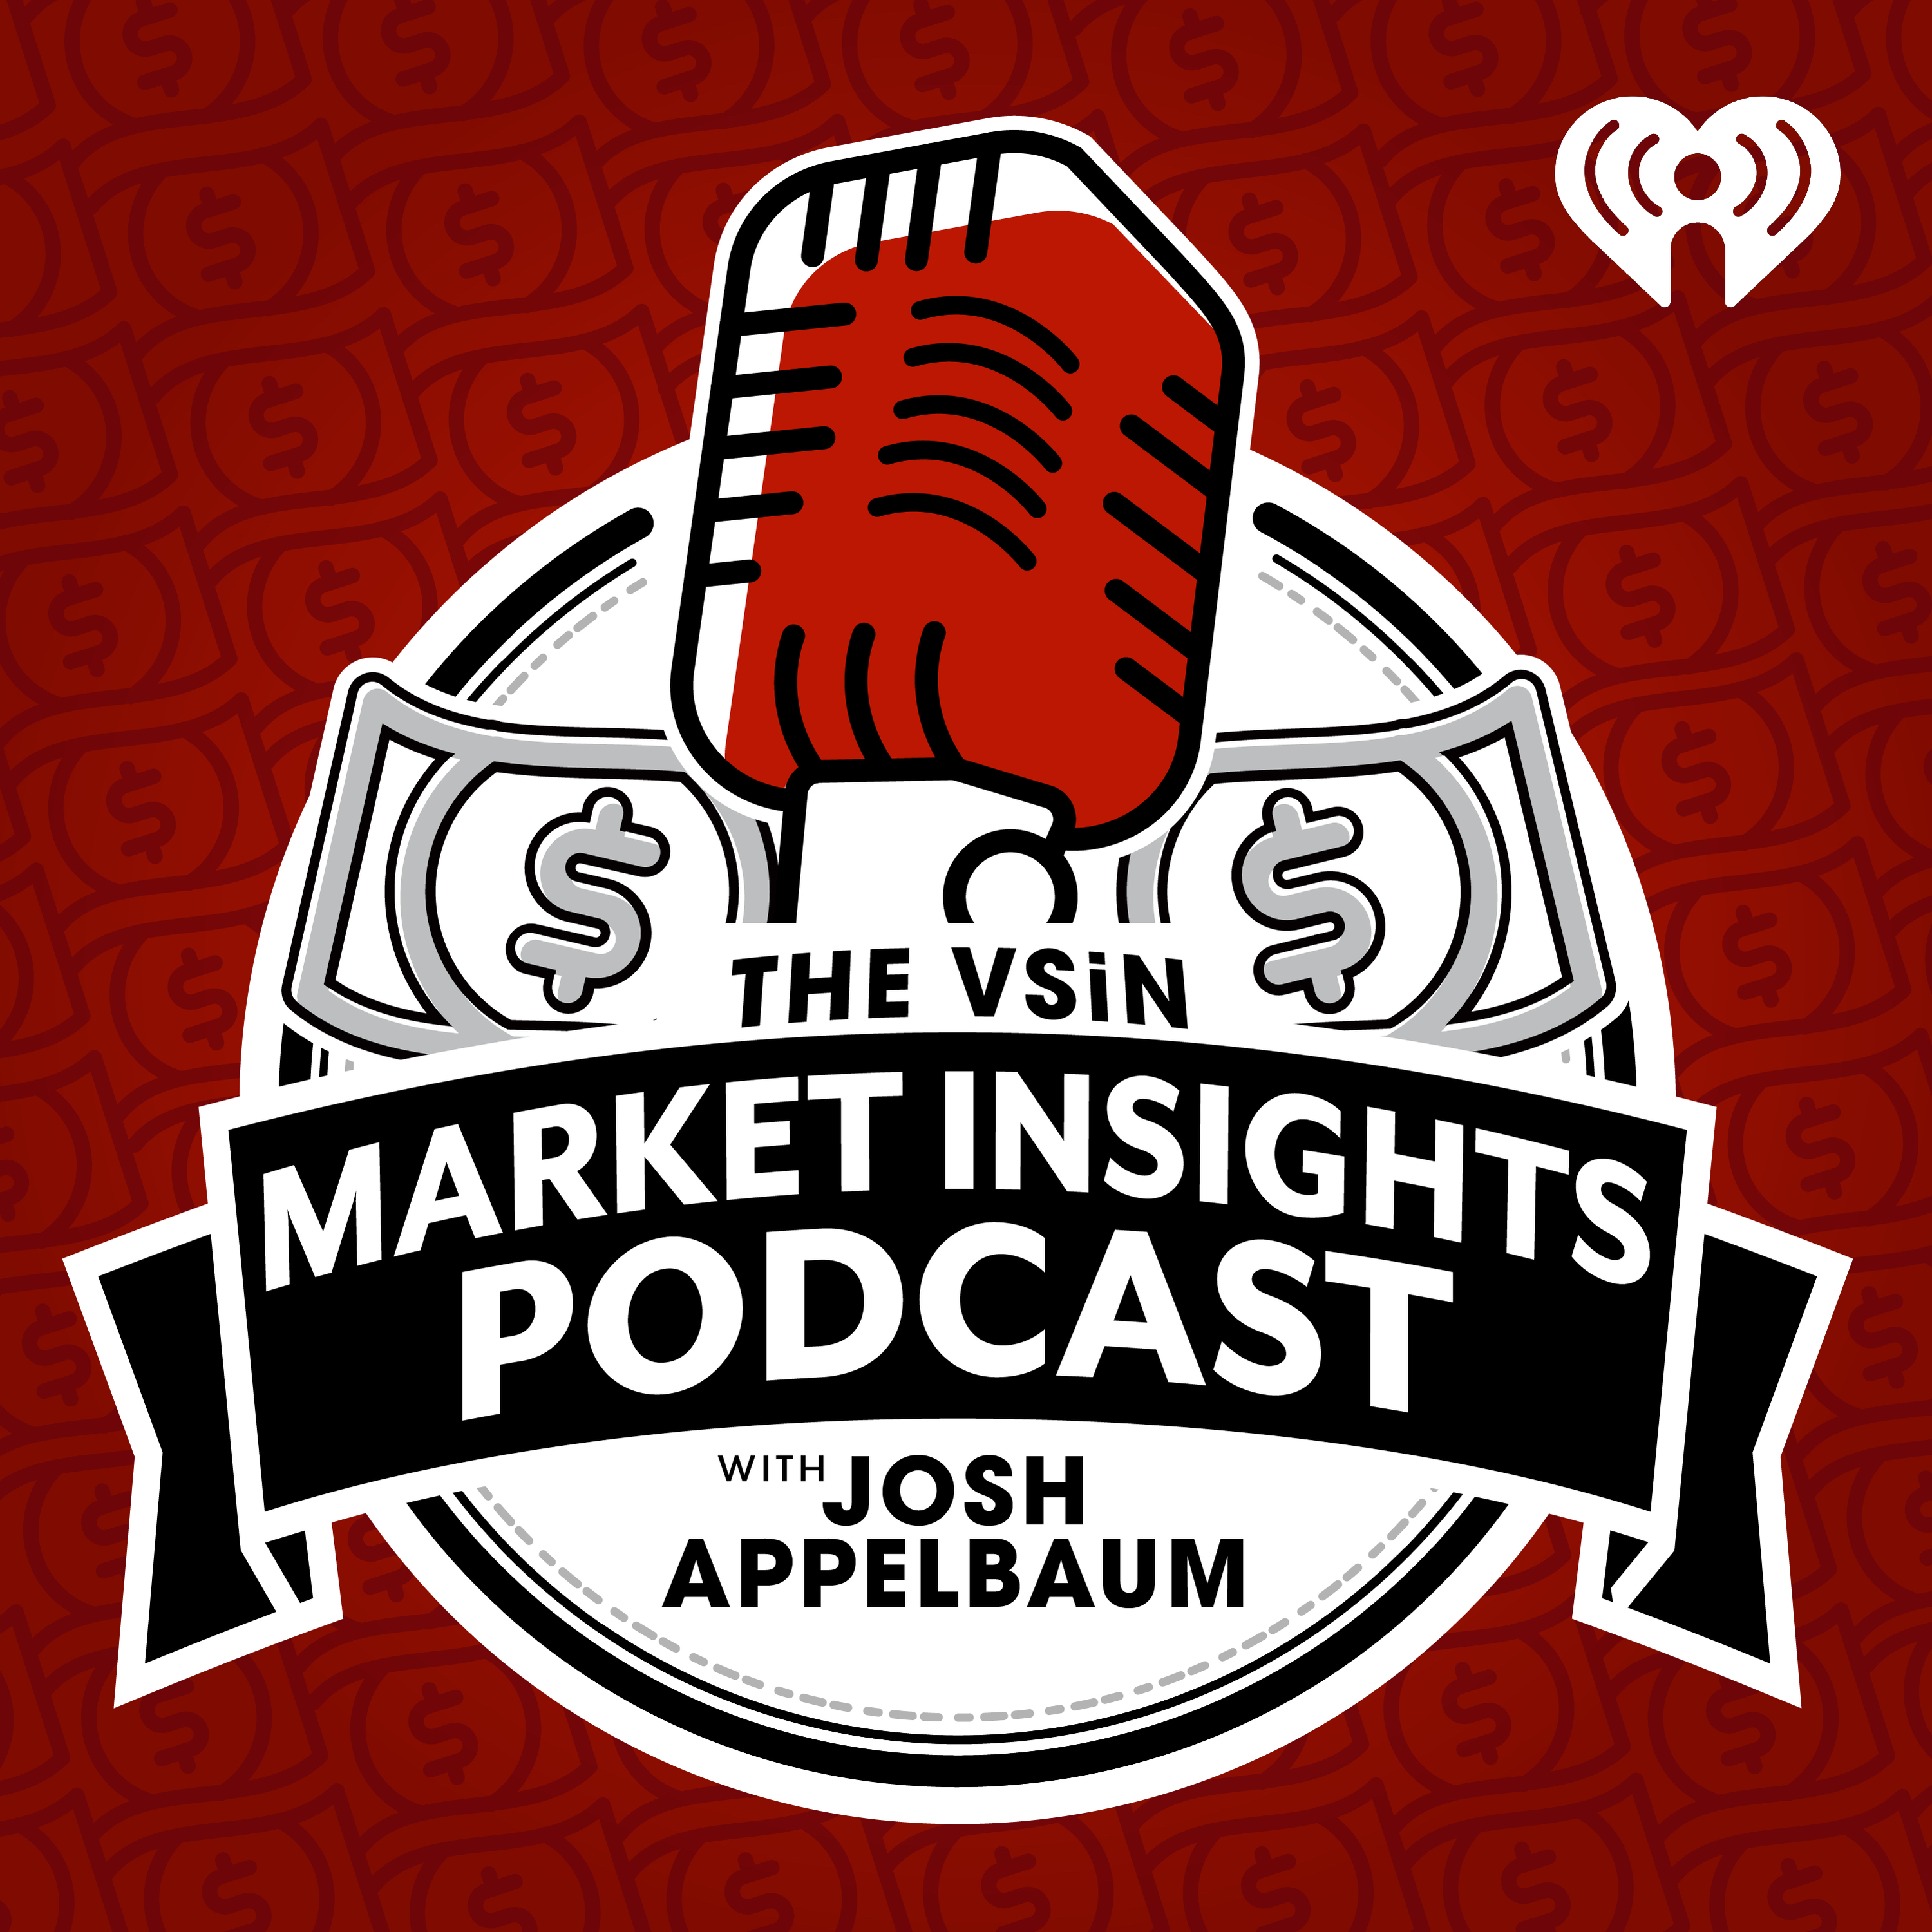 The VSiN Market Insights Podcast with Josh Appelbaum | March 23, 2022